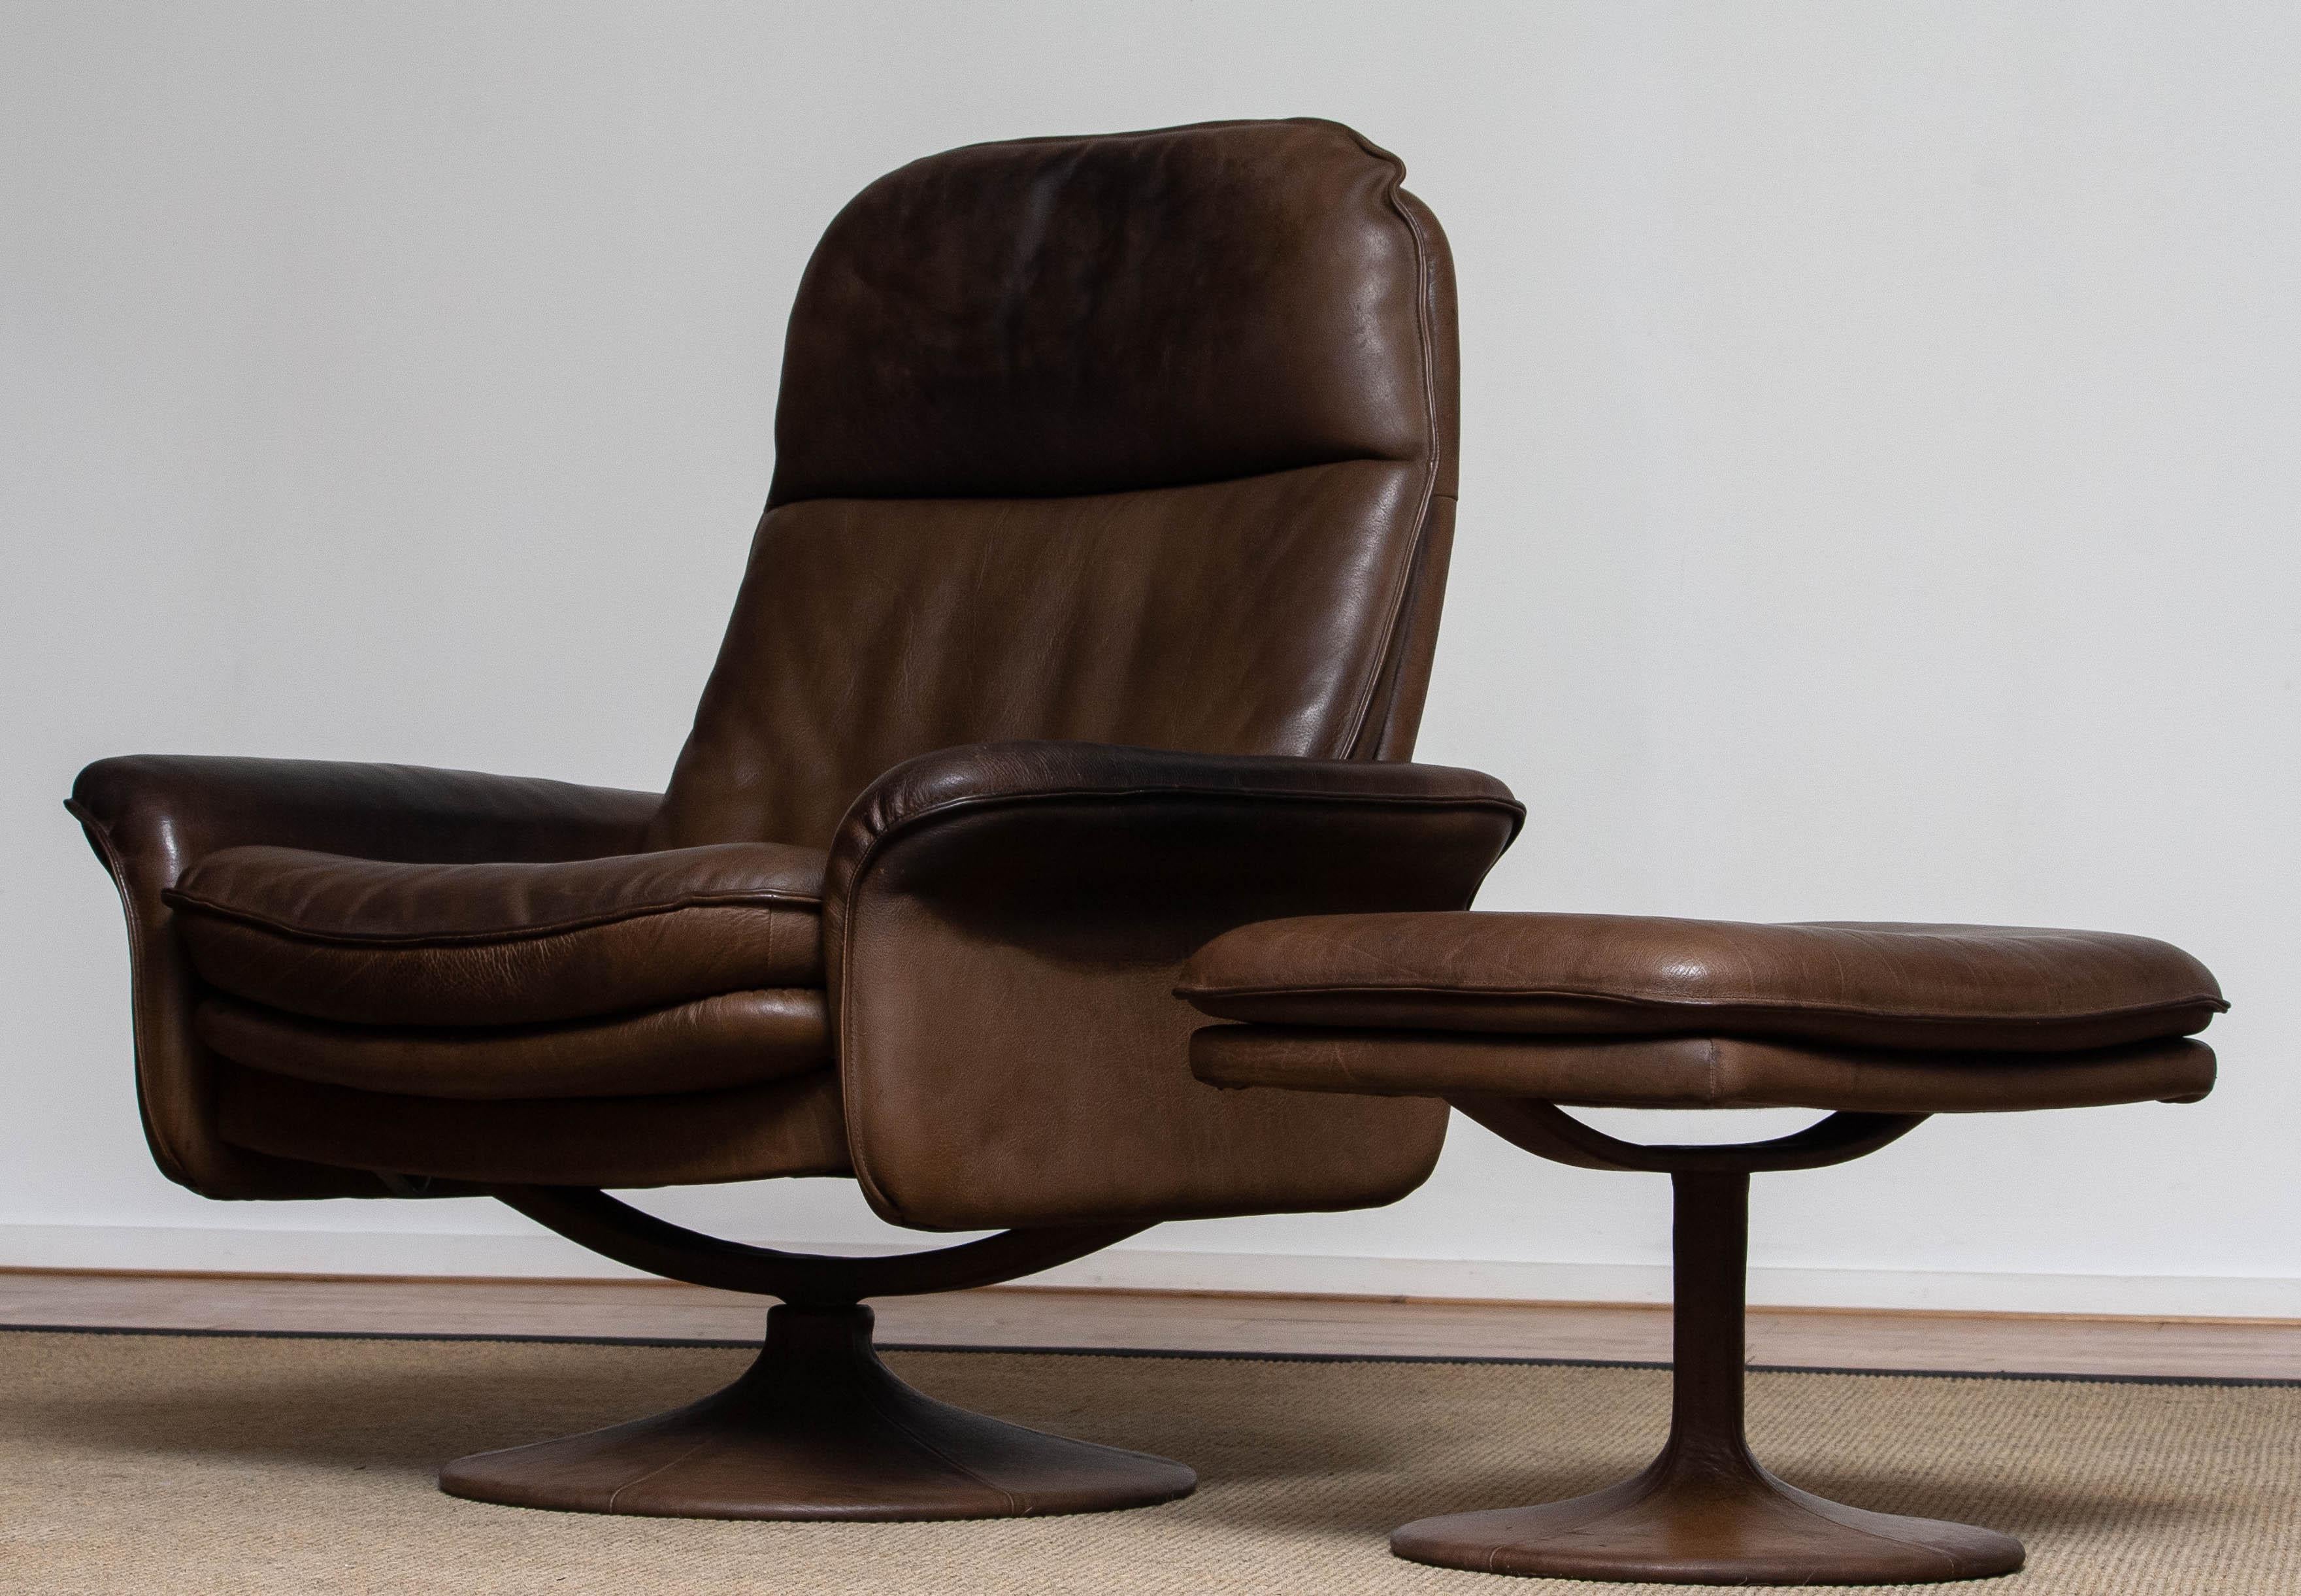 Swiss 1970's Buffalo Leather Swivel and Relax Chair with Matching Ottoman by De Sede